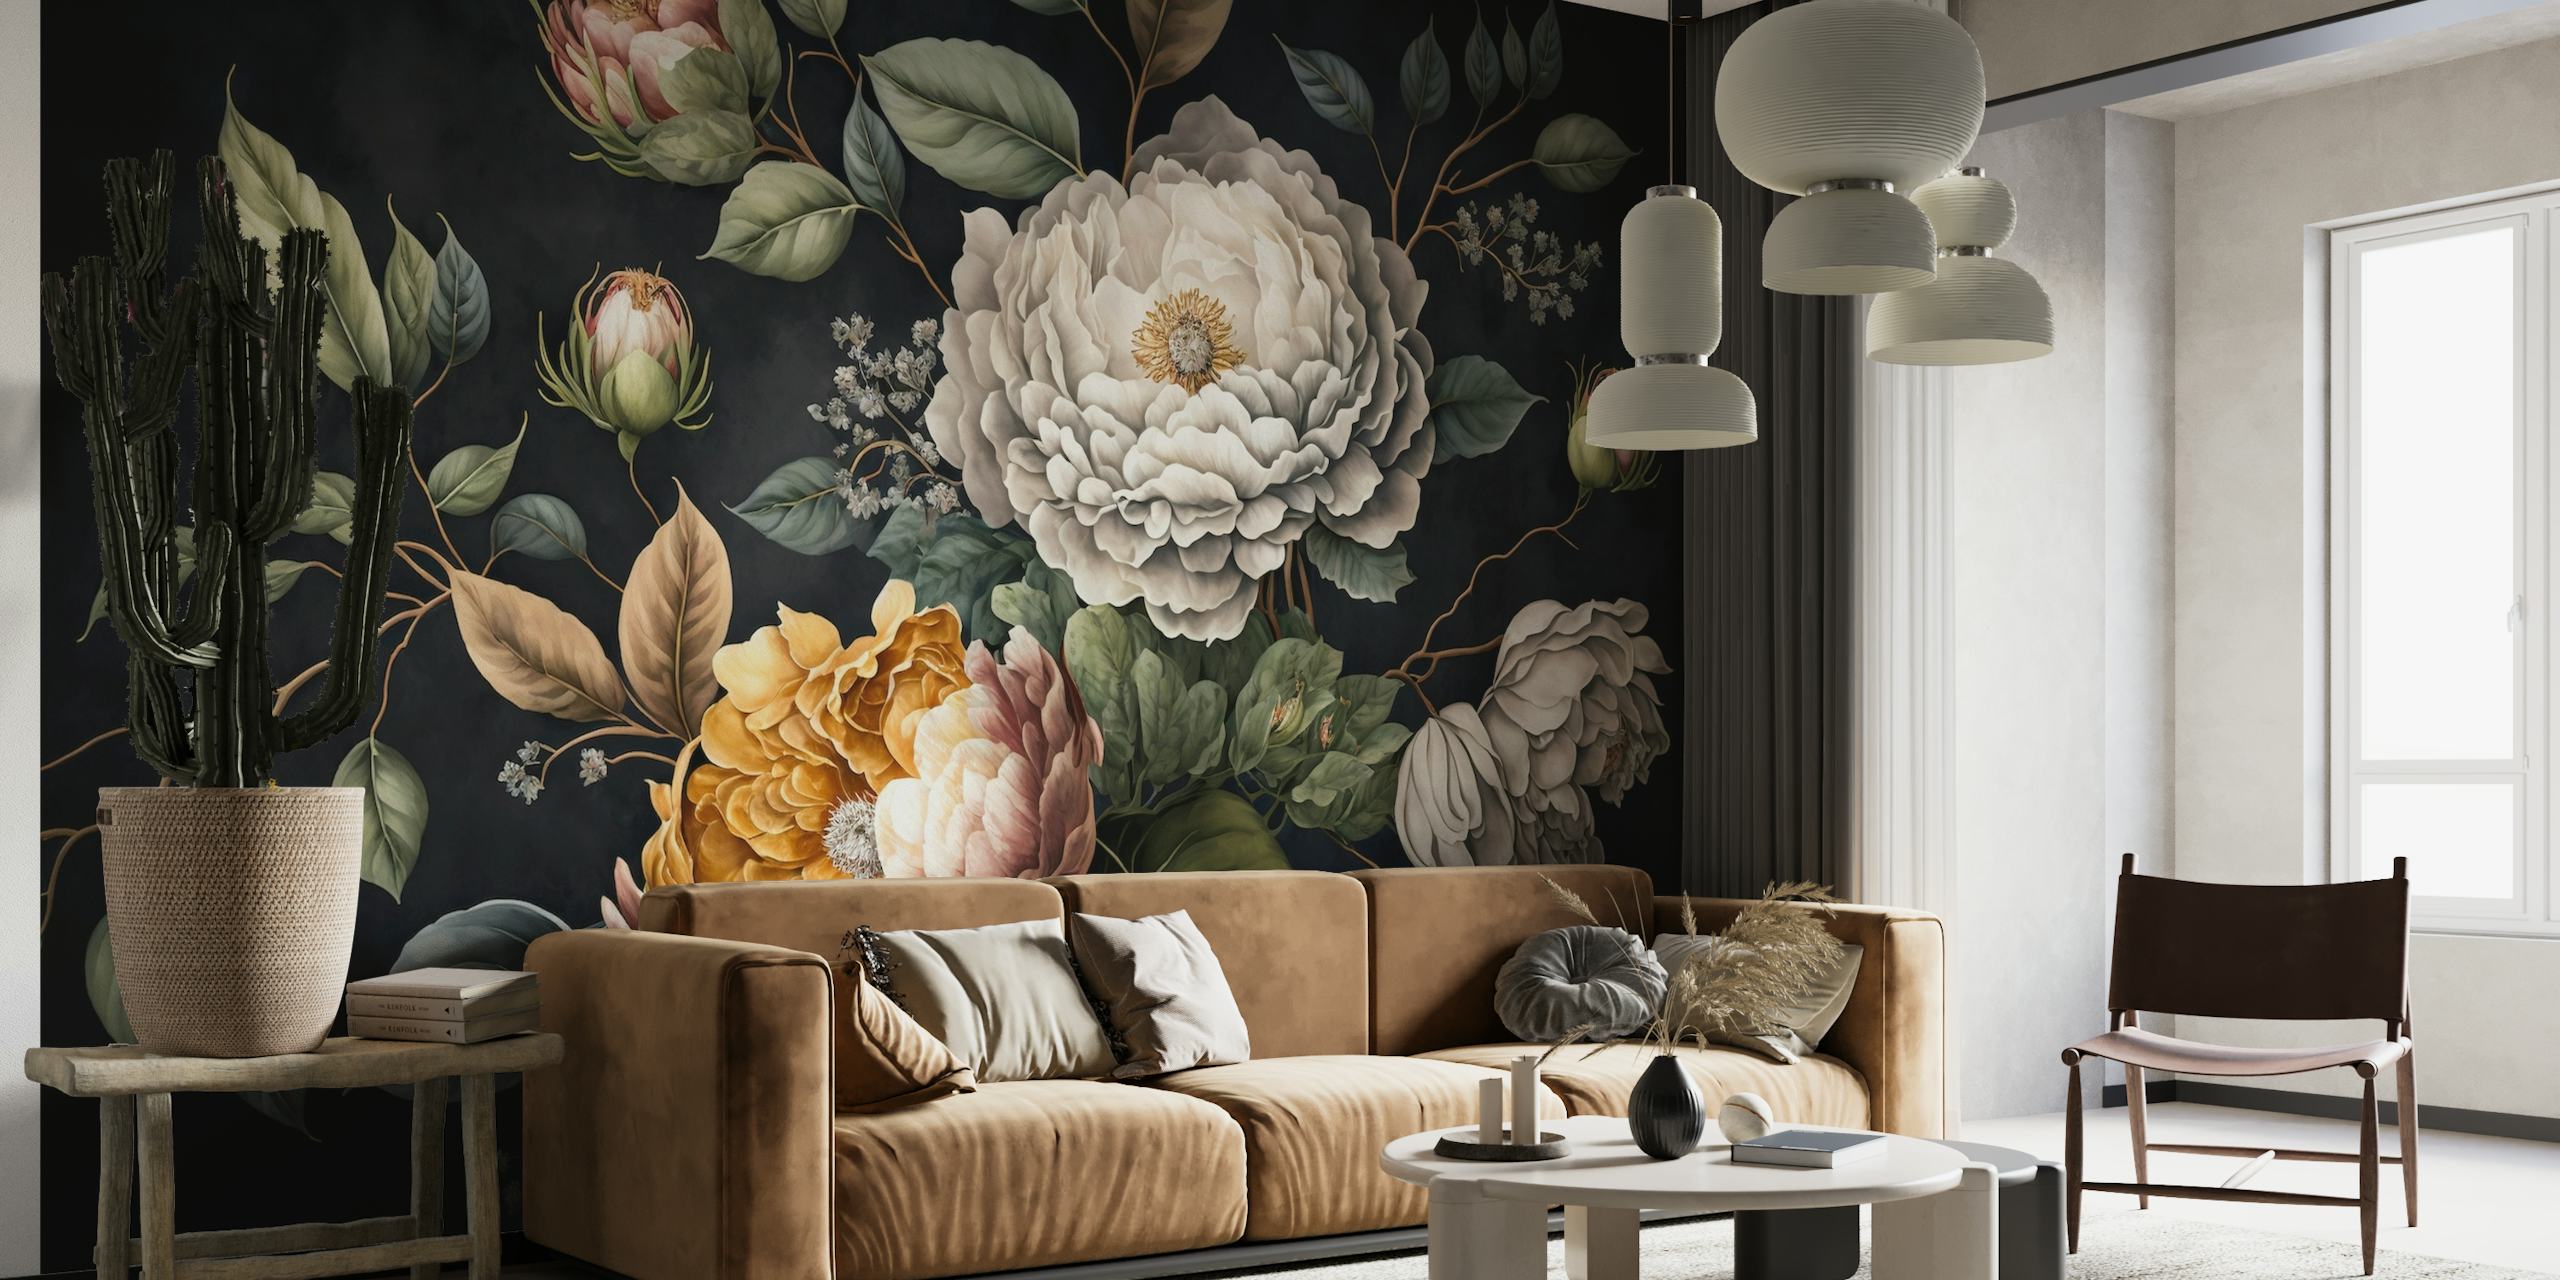 Moody Baroque Large Floral II wall mural with lush, detailed flowers on a dark background